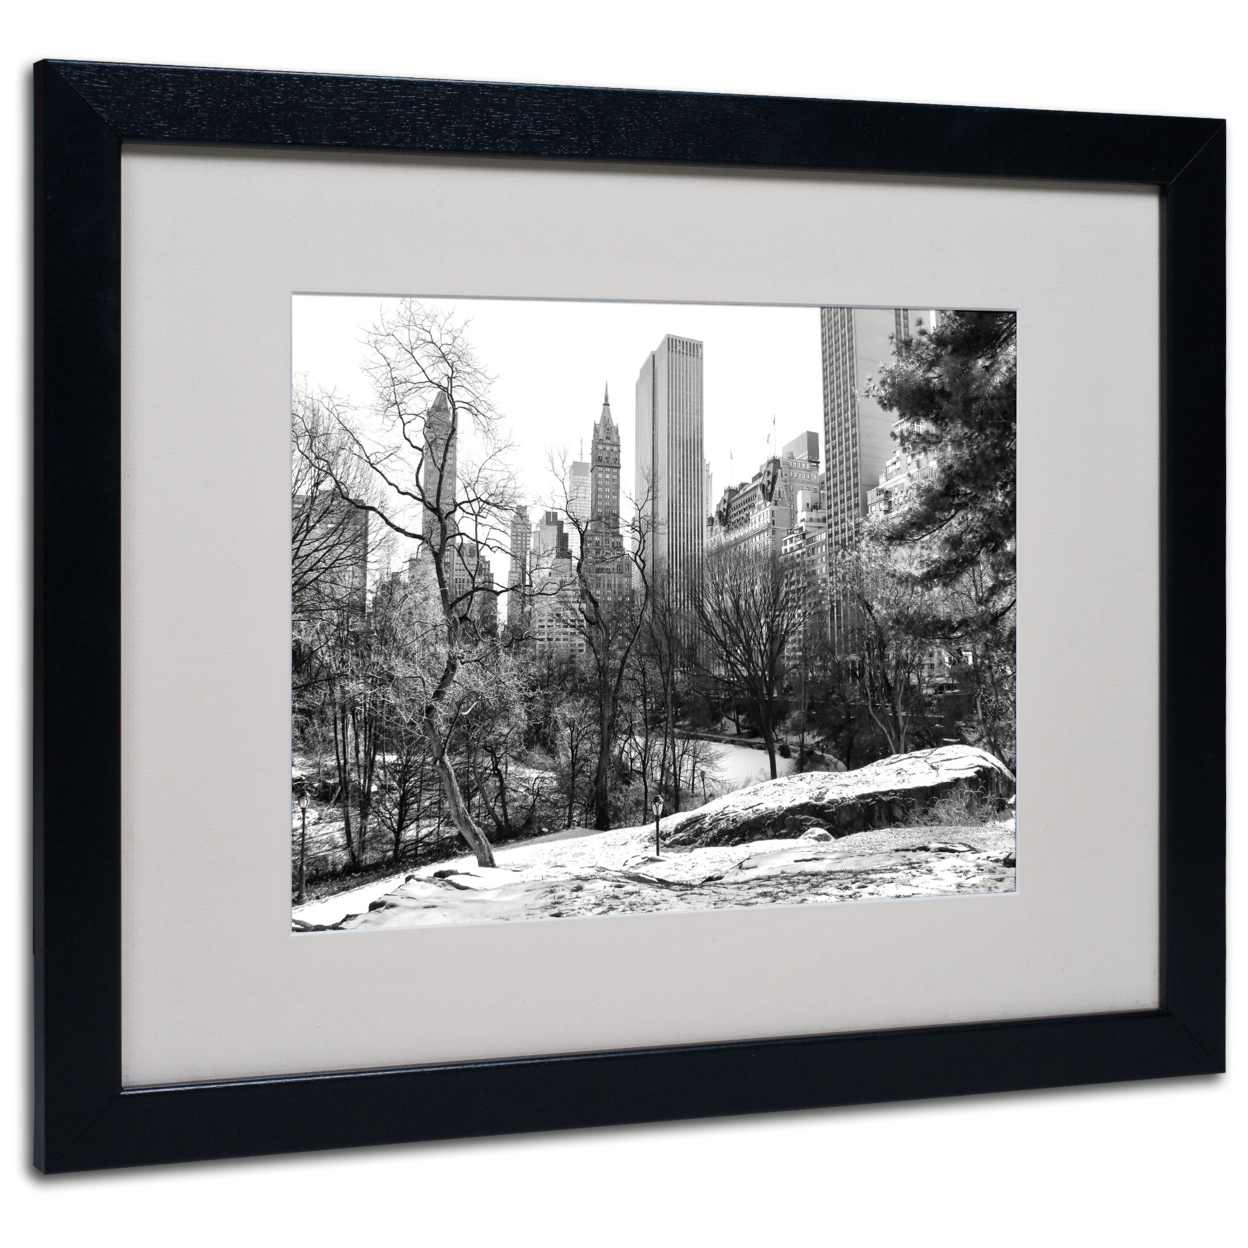 CATeyes 'Central Park' Black Wooden Framed Art 18 X 22 Inches